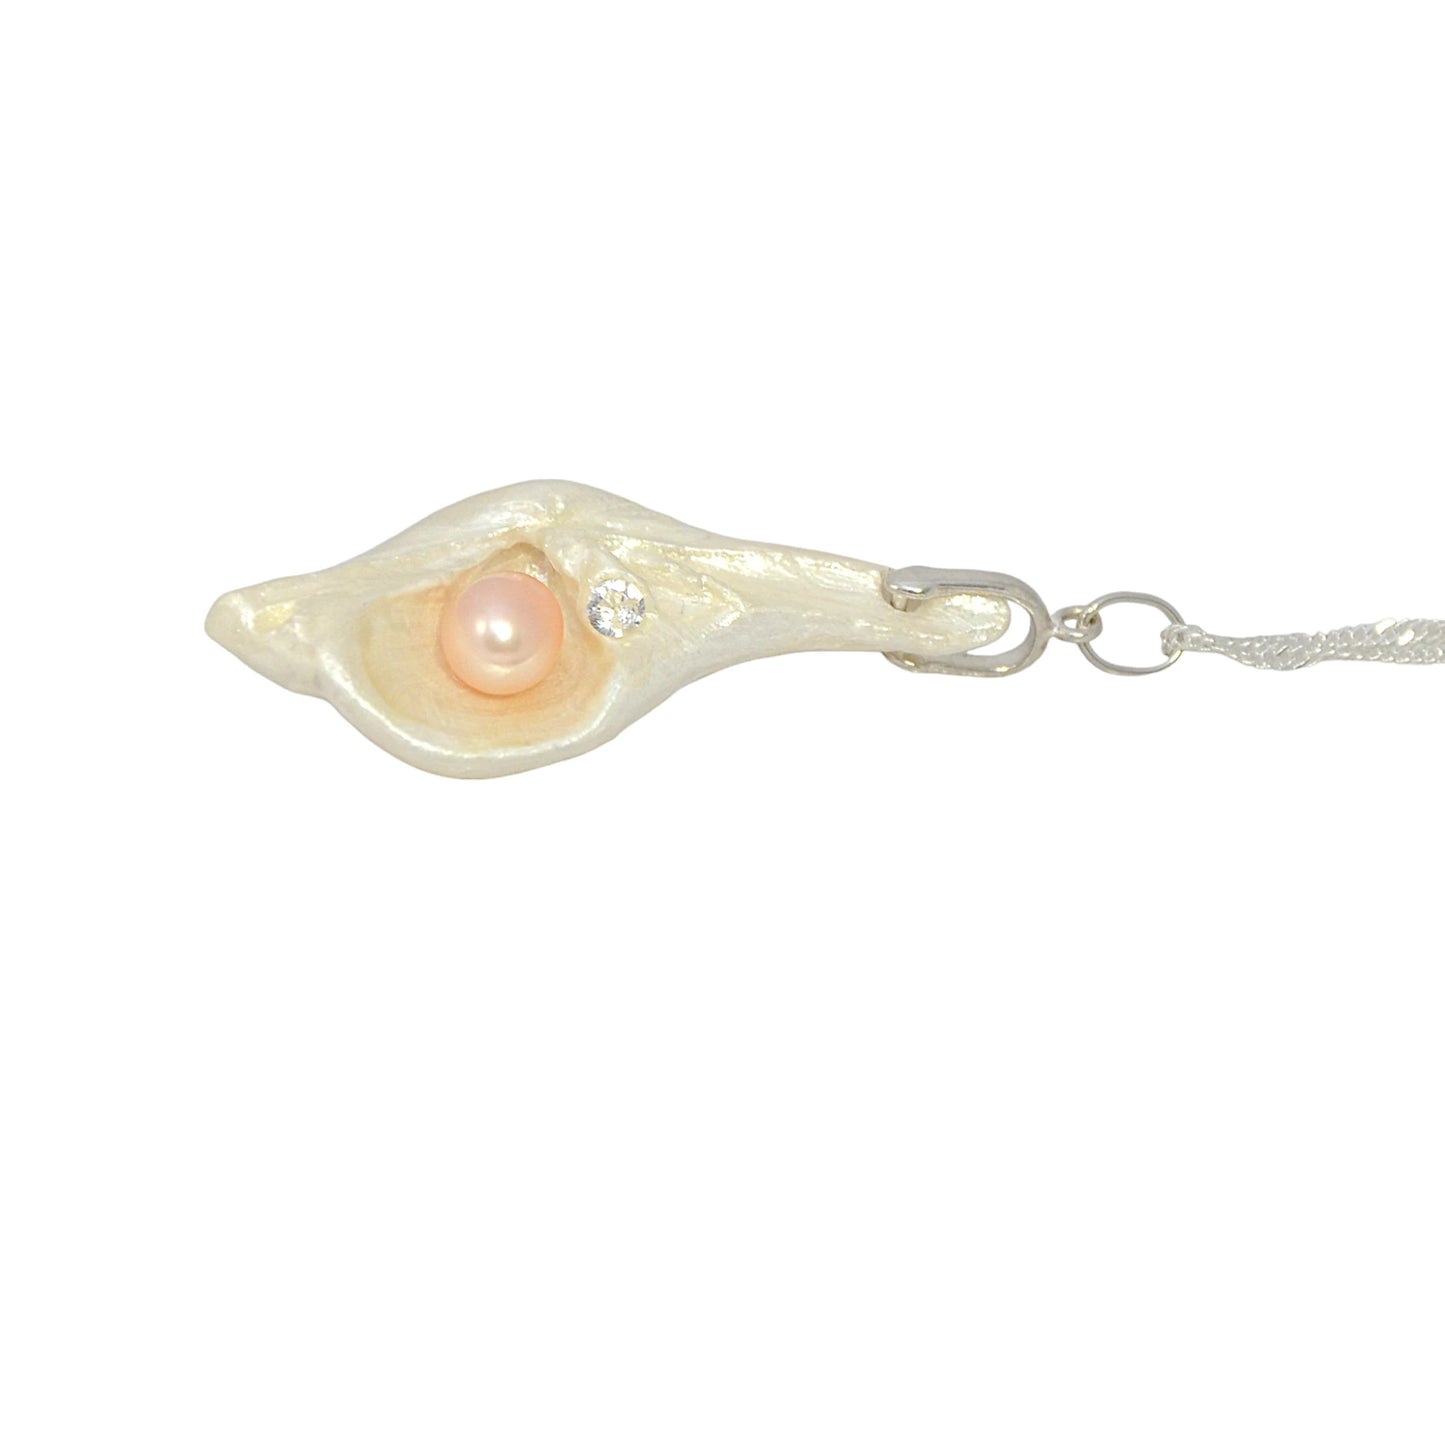 The pendant is laying on its side to show the viewer the pearl and faceted herkimer diamond.